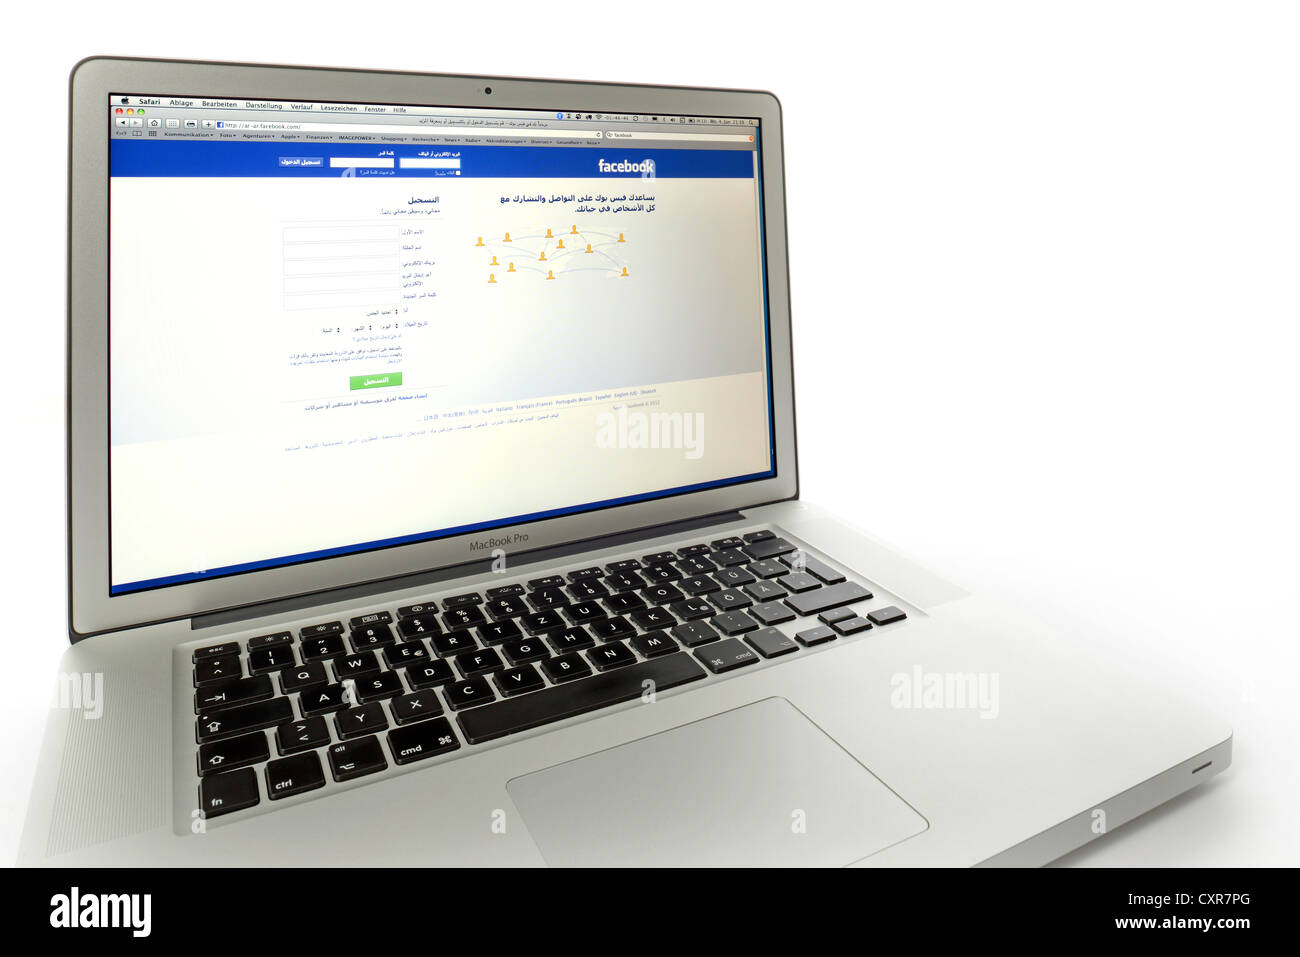 Arab language version of Facebook, social networking website displayed on the screen of an Apple MacBook Pro Stock Photo